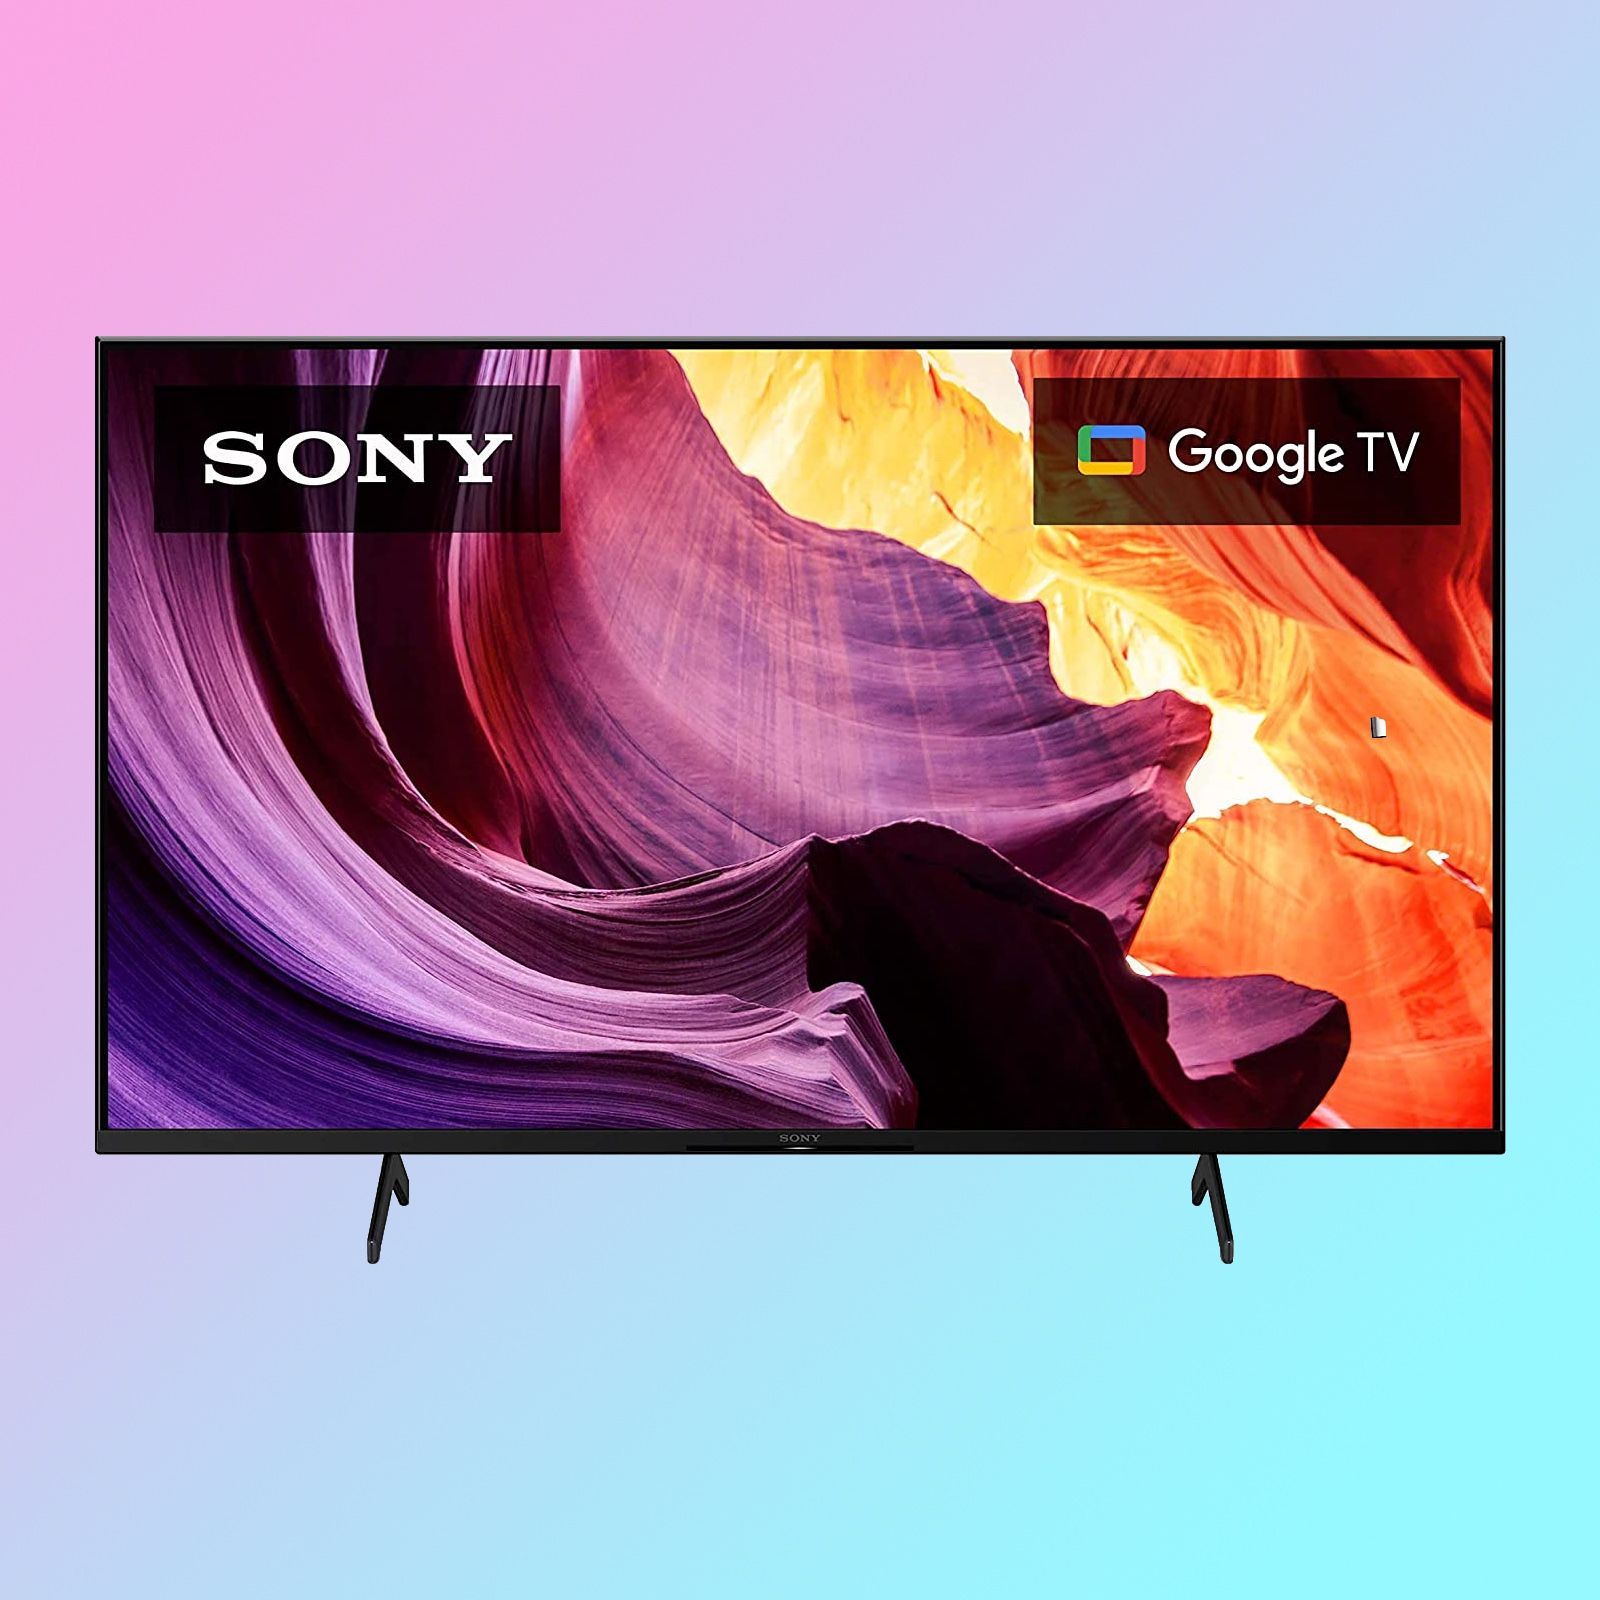 Best Prime Day TV deals Last chance to save big on great TVs